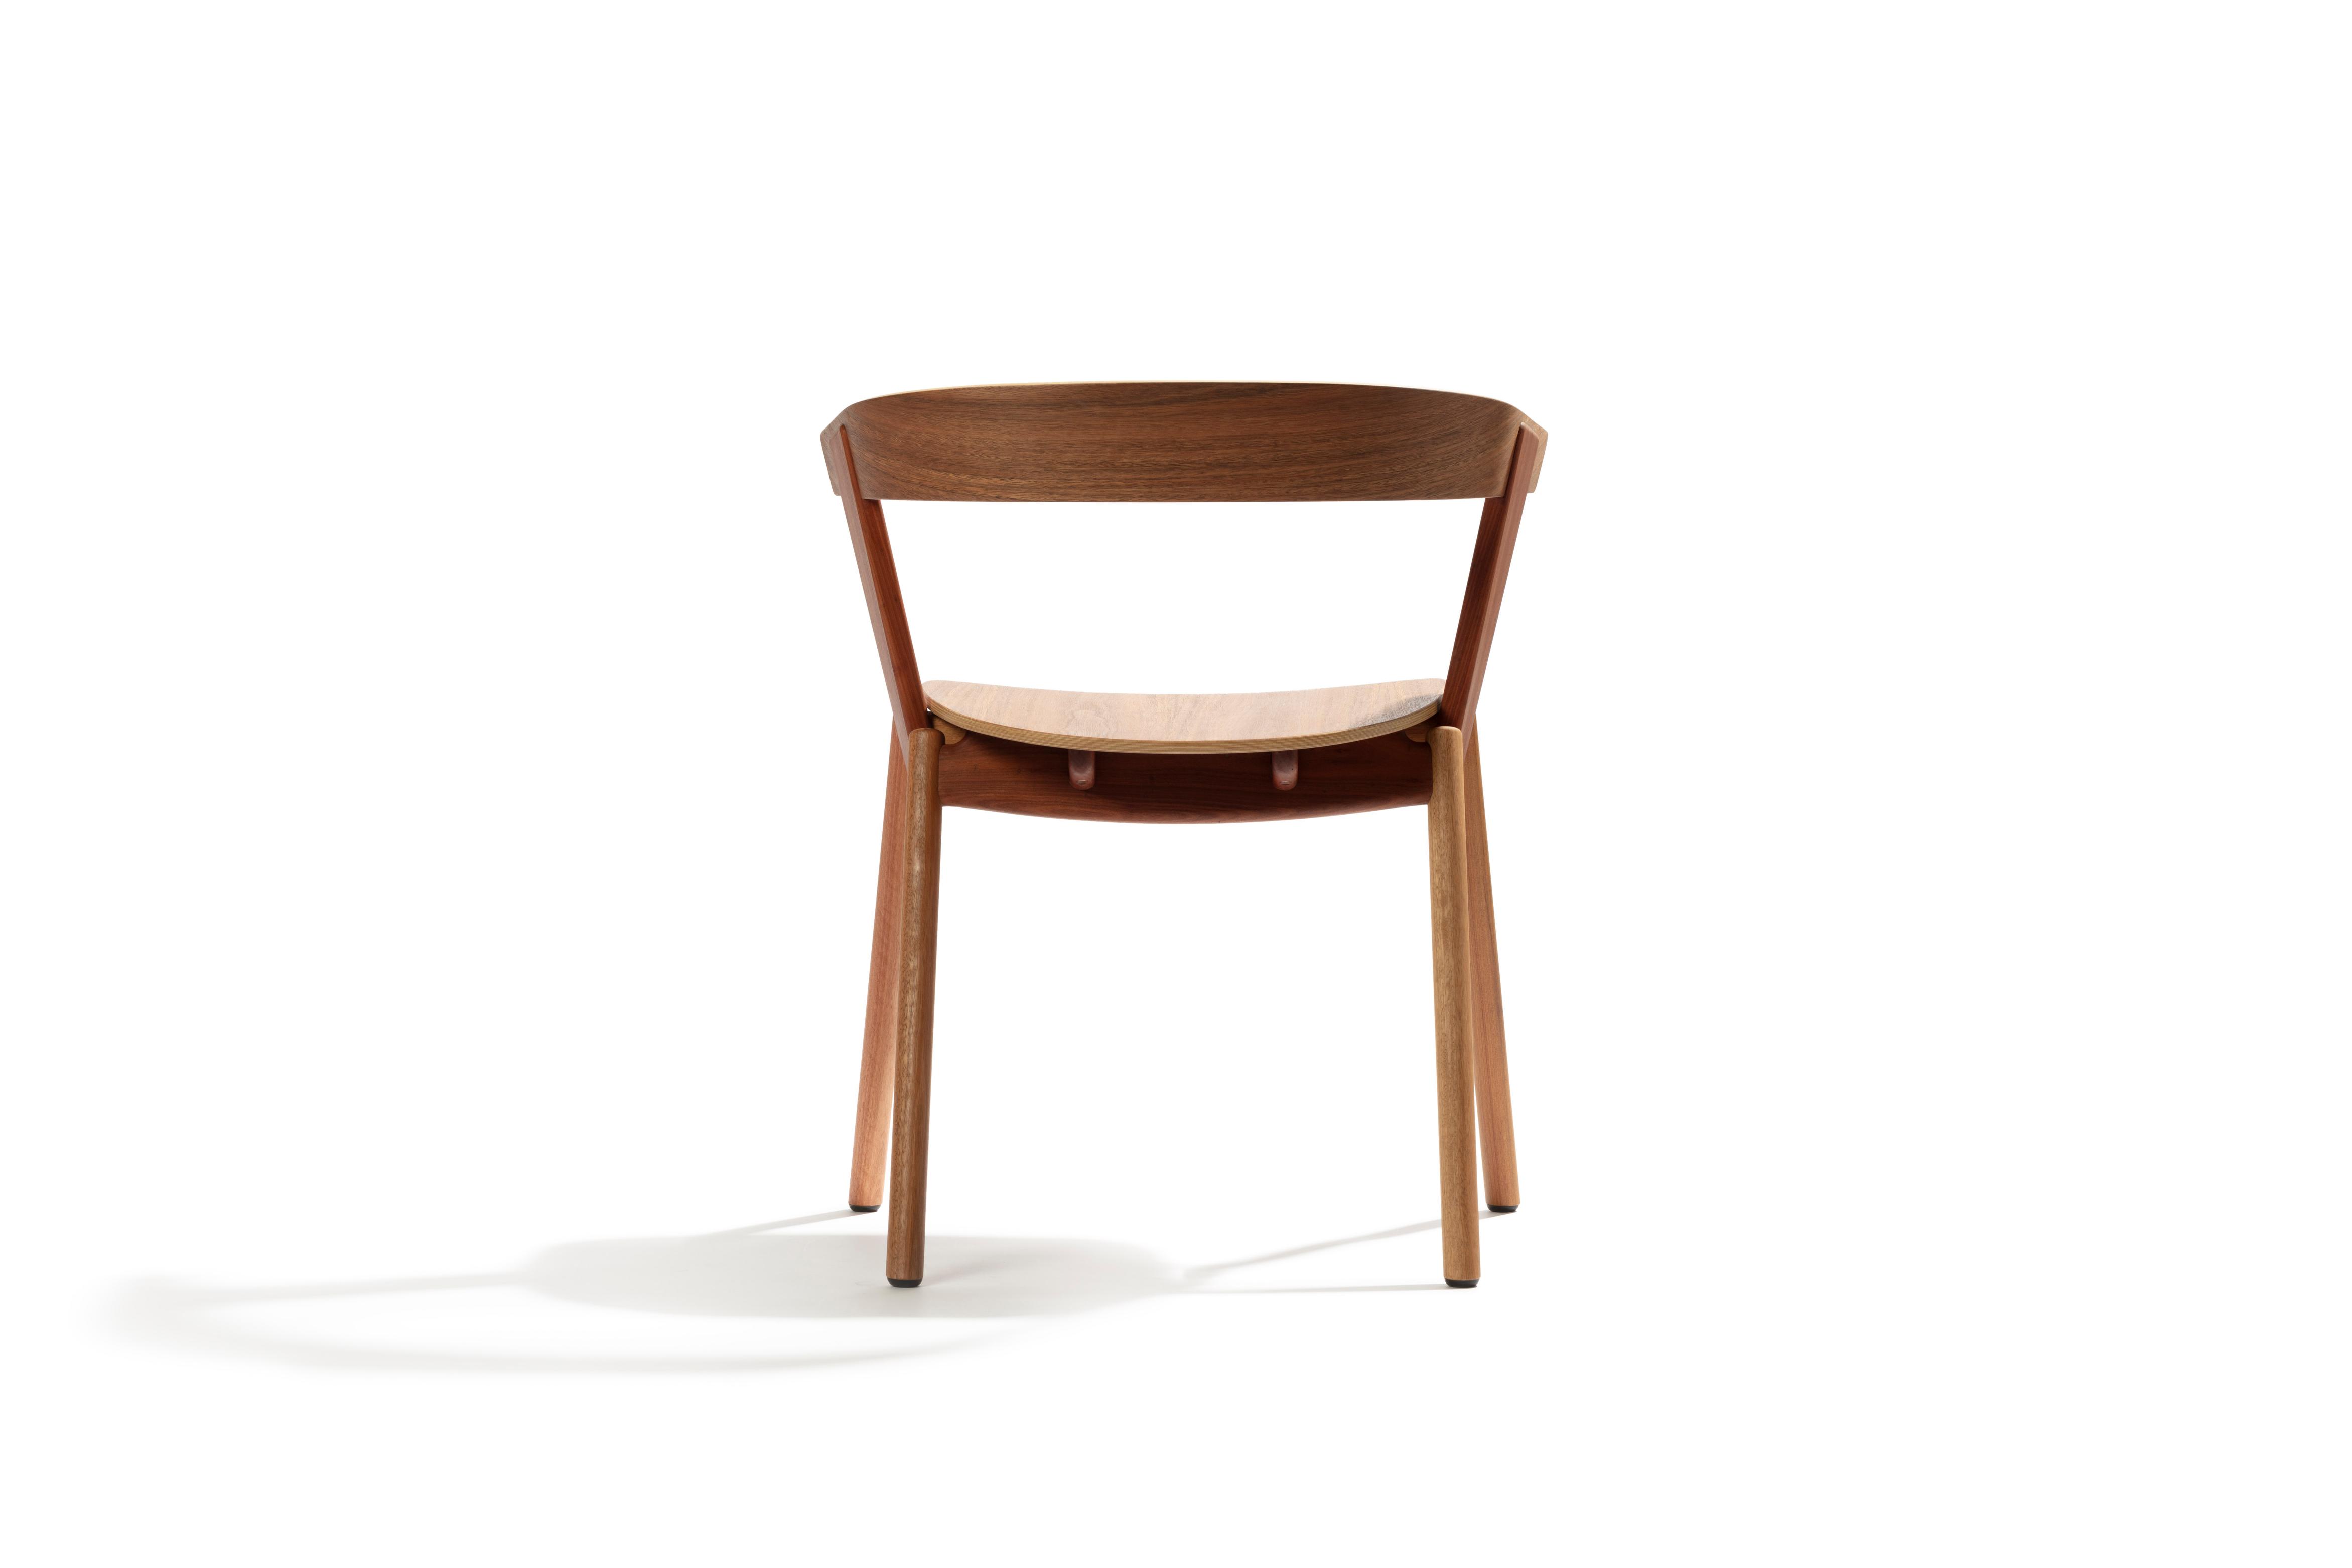 Rear preview of a wooden chair.